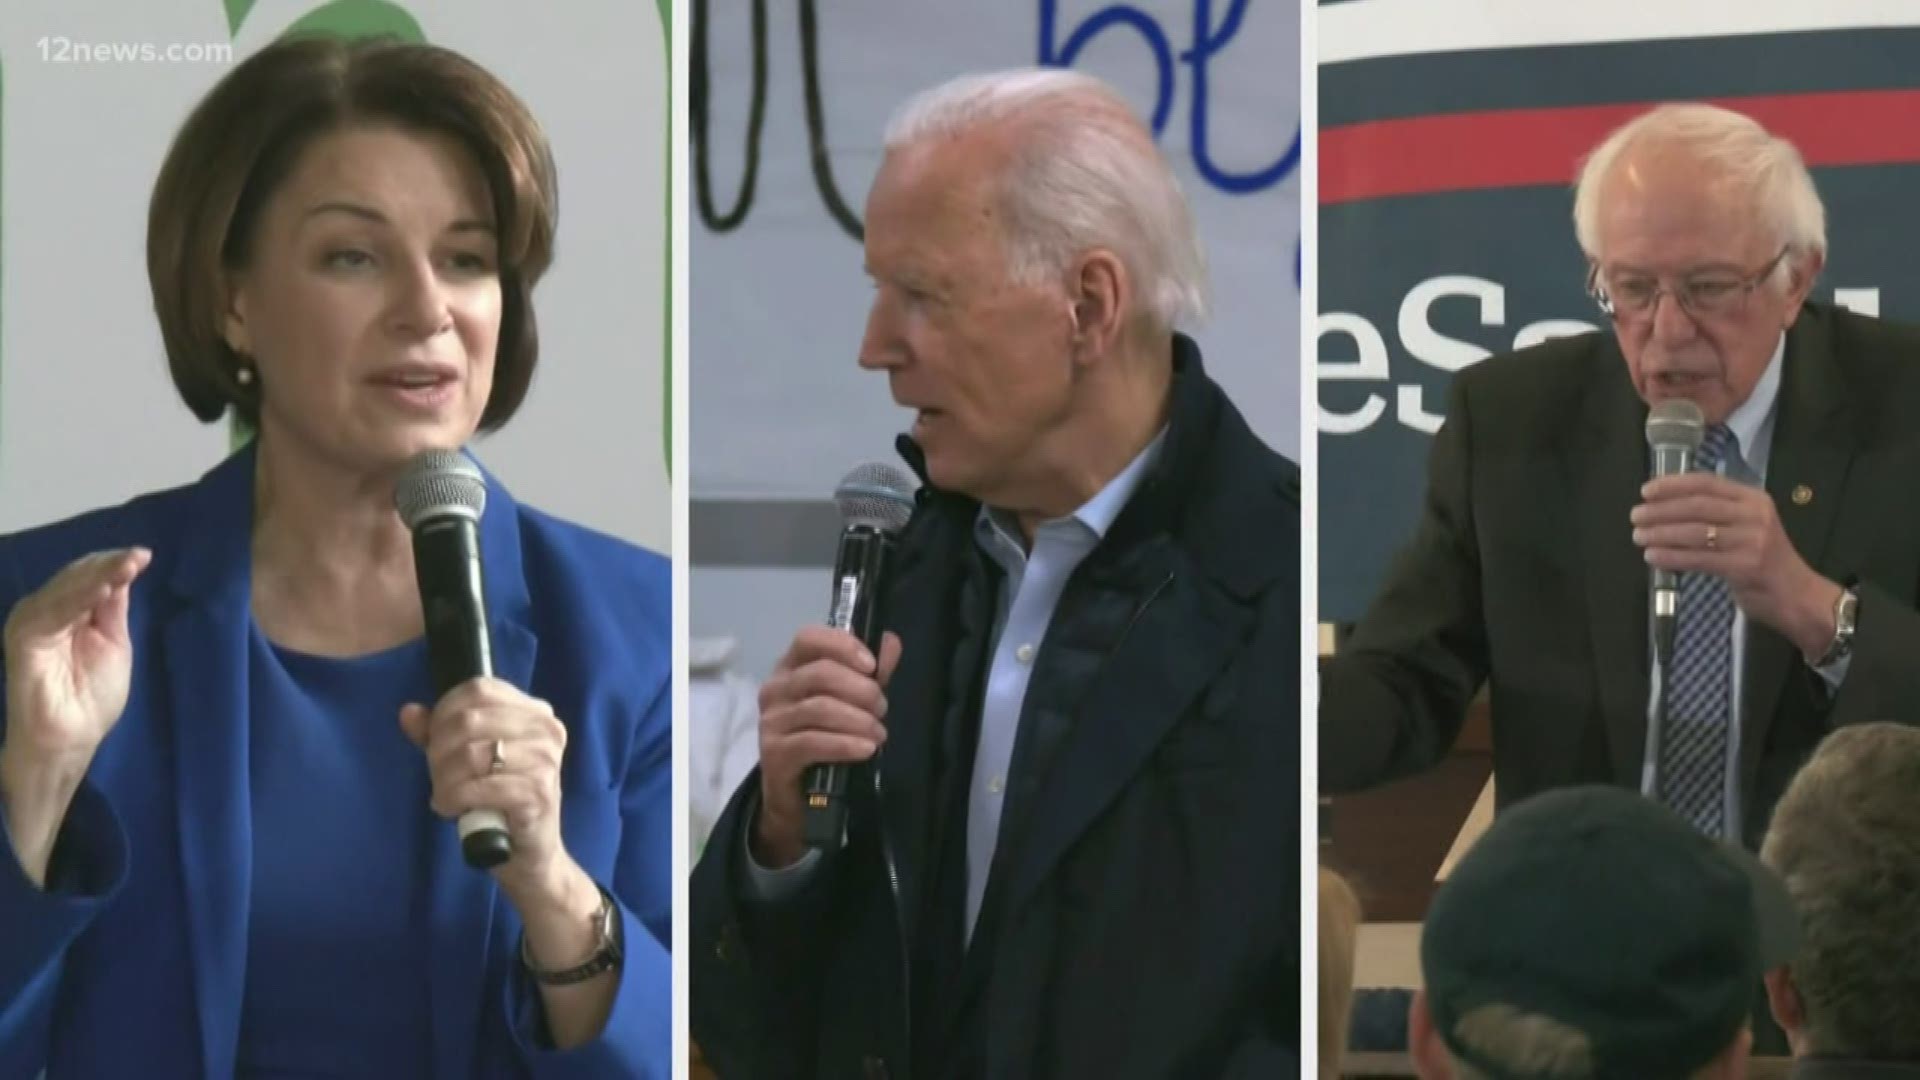 Phoenix will host a Democratic presidential debate before Arizona's presidential preference election. The Democratic primary is open only to registered Democrats.